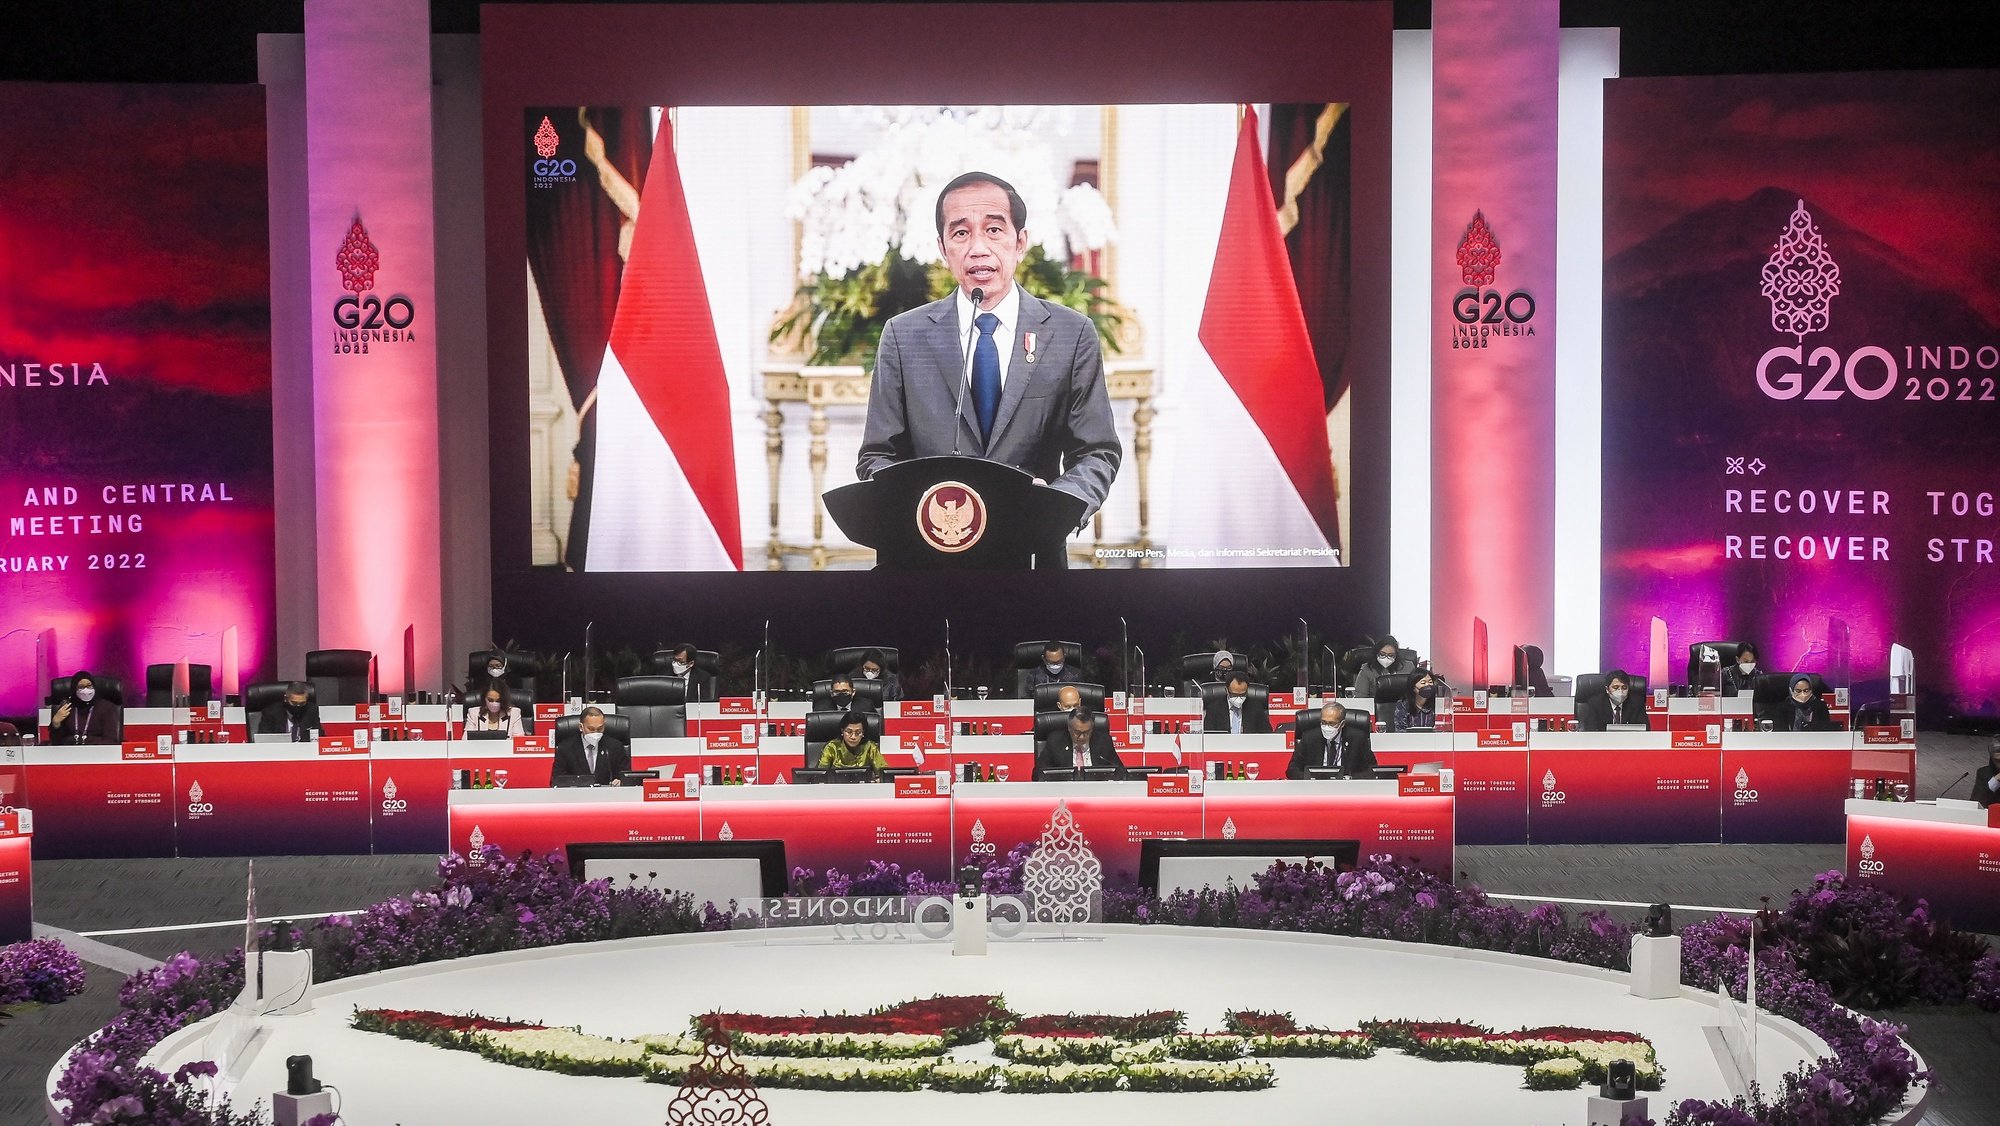 epa09764383 Indonesia’s President Joko Widodo delivers his speech on a recorded video during the opening ceremony of the G20 finance ministers and central bank governors meeting in Jakarta, Indonesia, 17 February 2022. Finance ministers and central bank governors from G20 members are expected to meet in Jakarta on 17-18 February as part of Indonesia’s G20 Presidency.  EPA/HAFIDZ MUBARAK / POOL POOL PHOTO